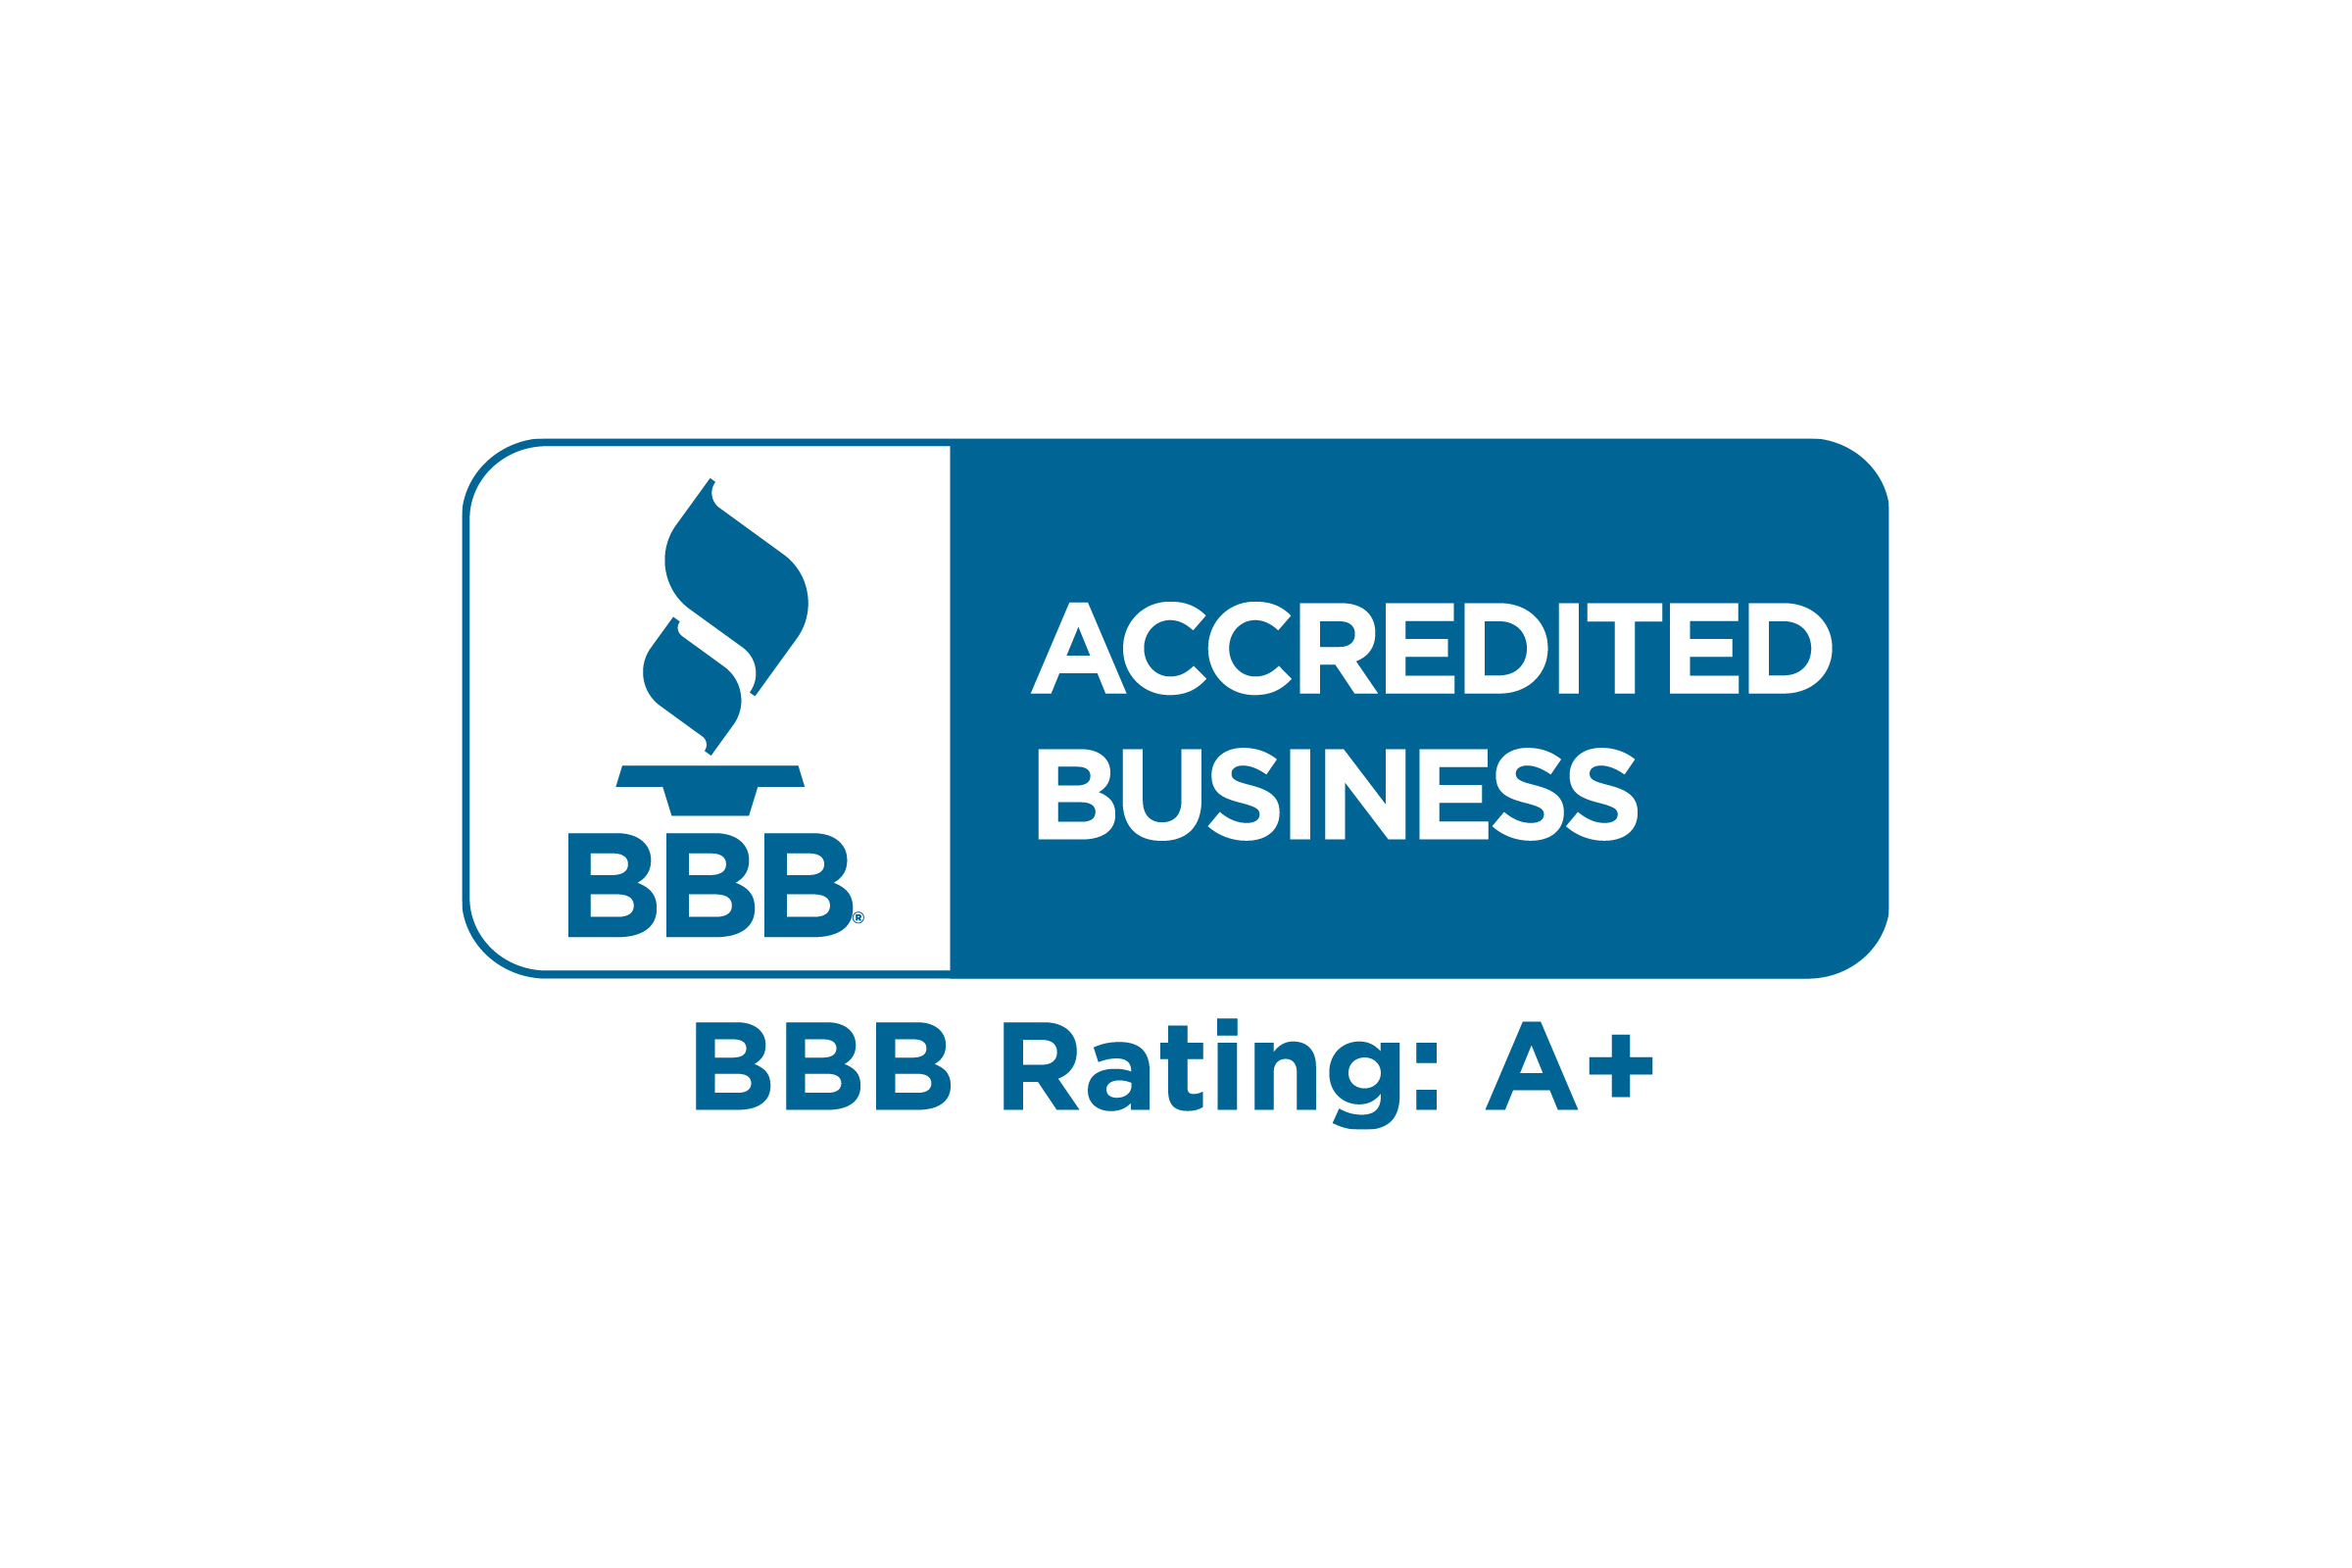 Celebrating Another Year of A+ BBB Accreditation